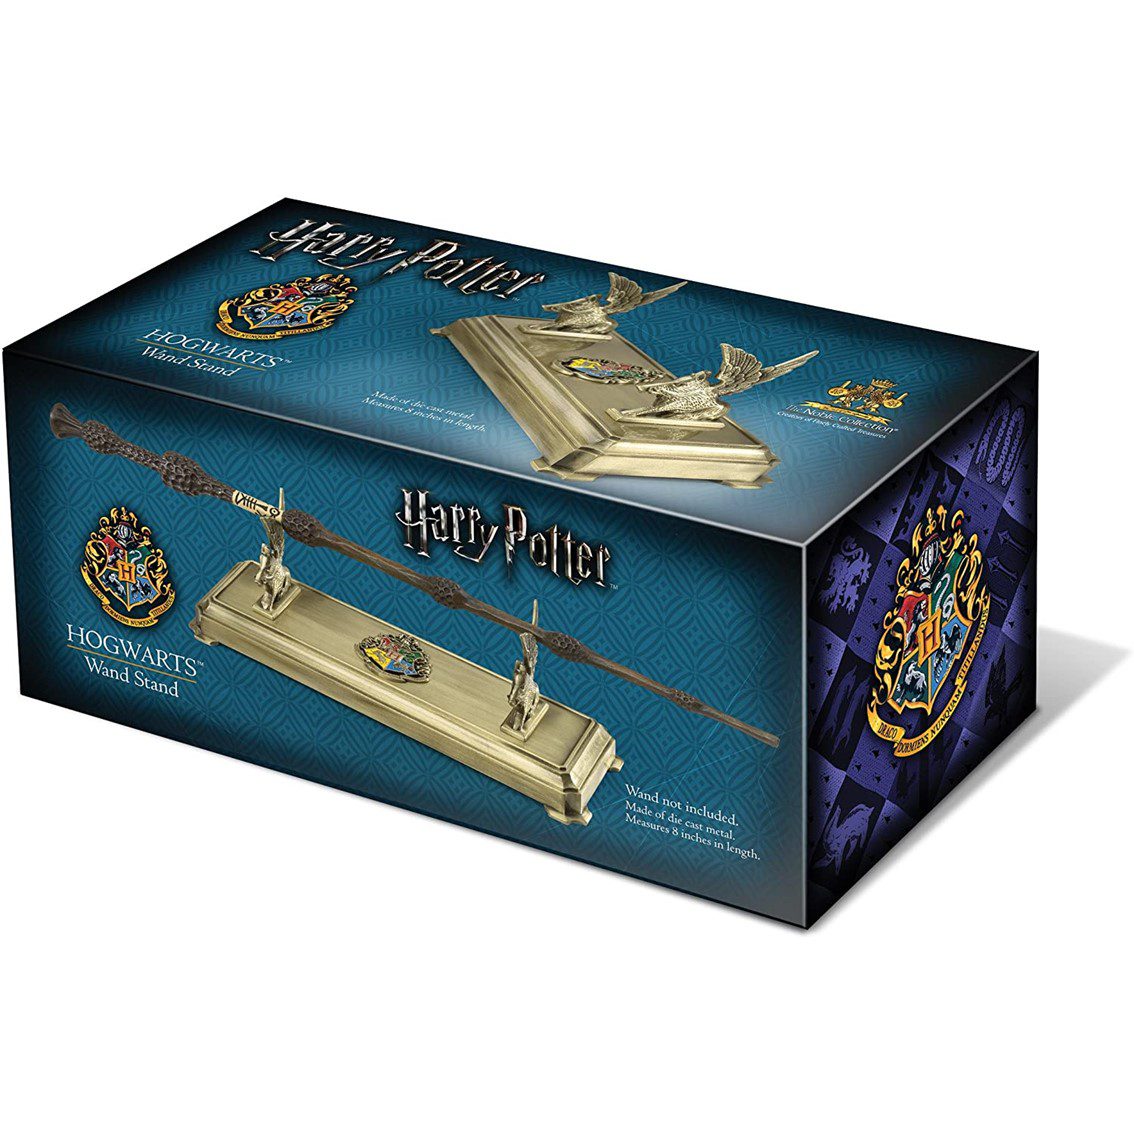 849421004057-PN-00NN9520-Cod.-Articulo-DSP0000005654-Replica-the-noble-collection-harry-potter-apoyavaritas-hogwarts-2